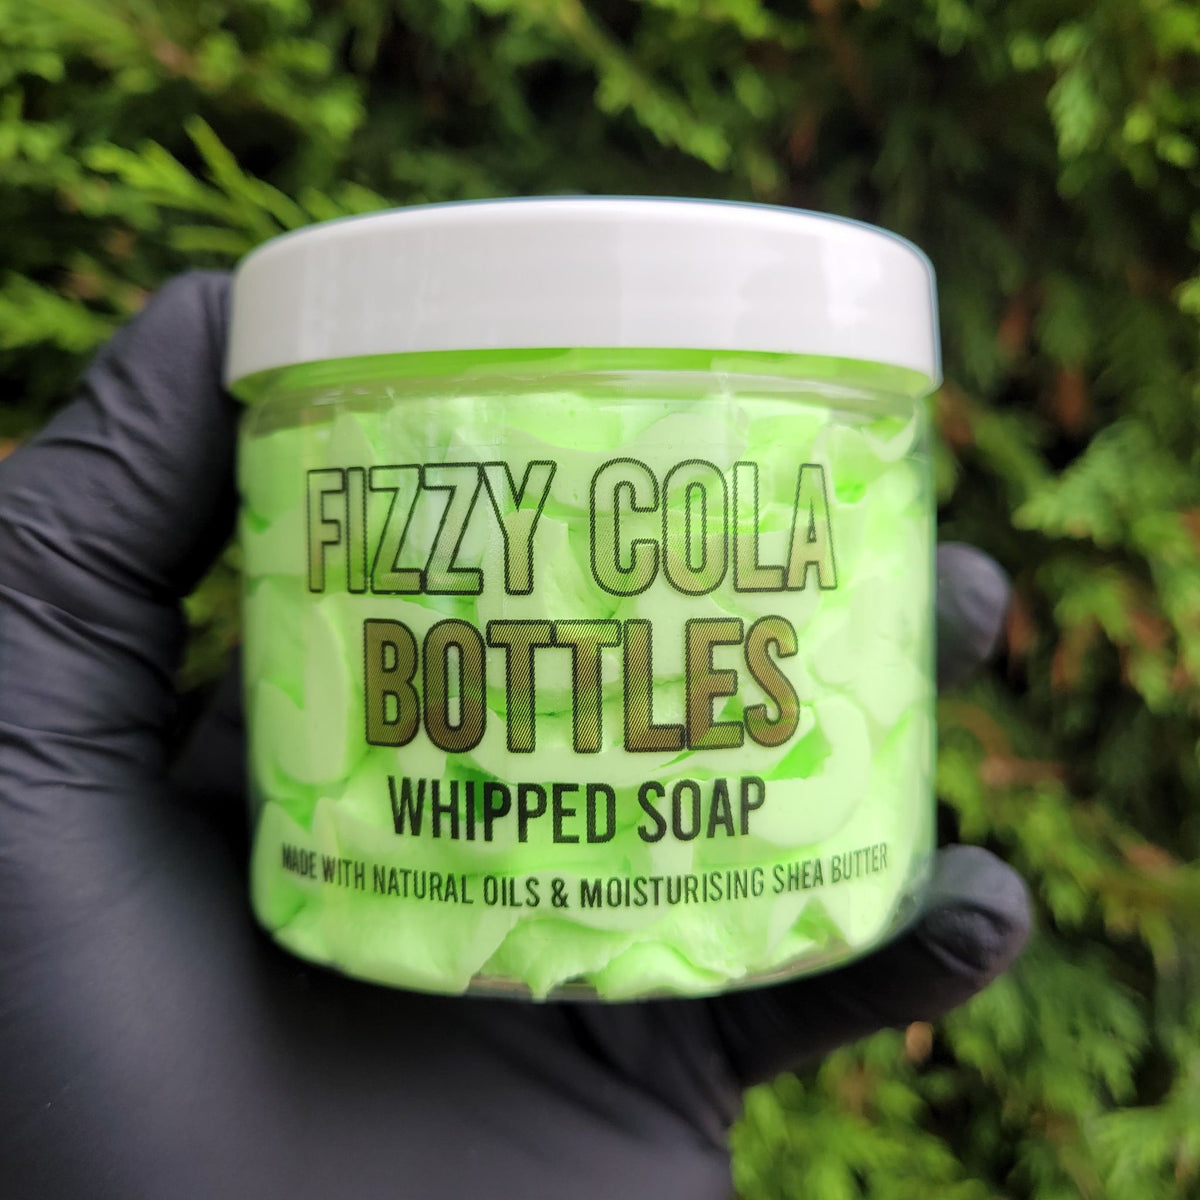 Fizzy Cola Bottles Whipped Soap